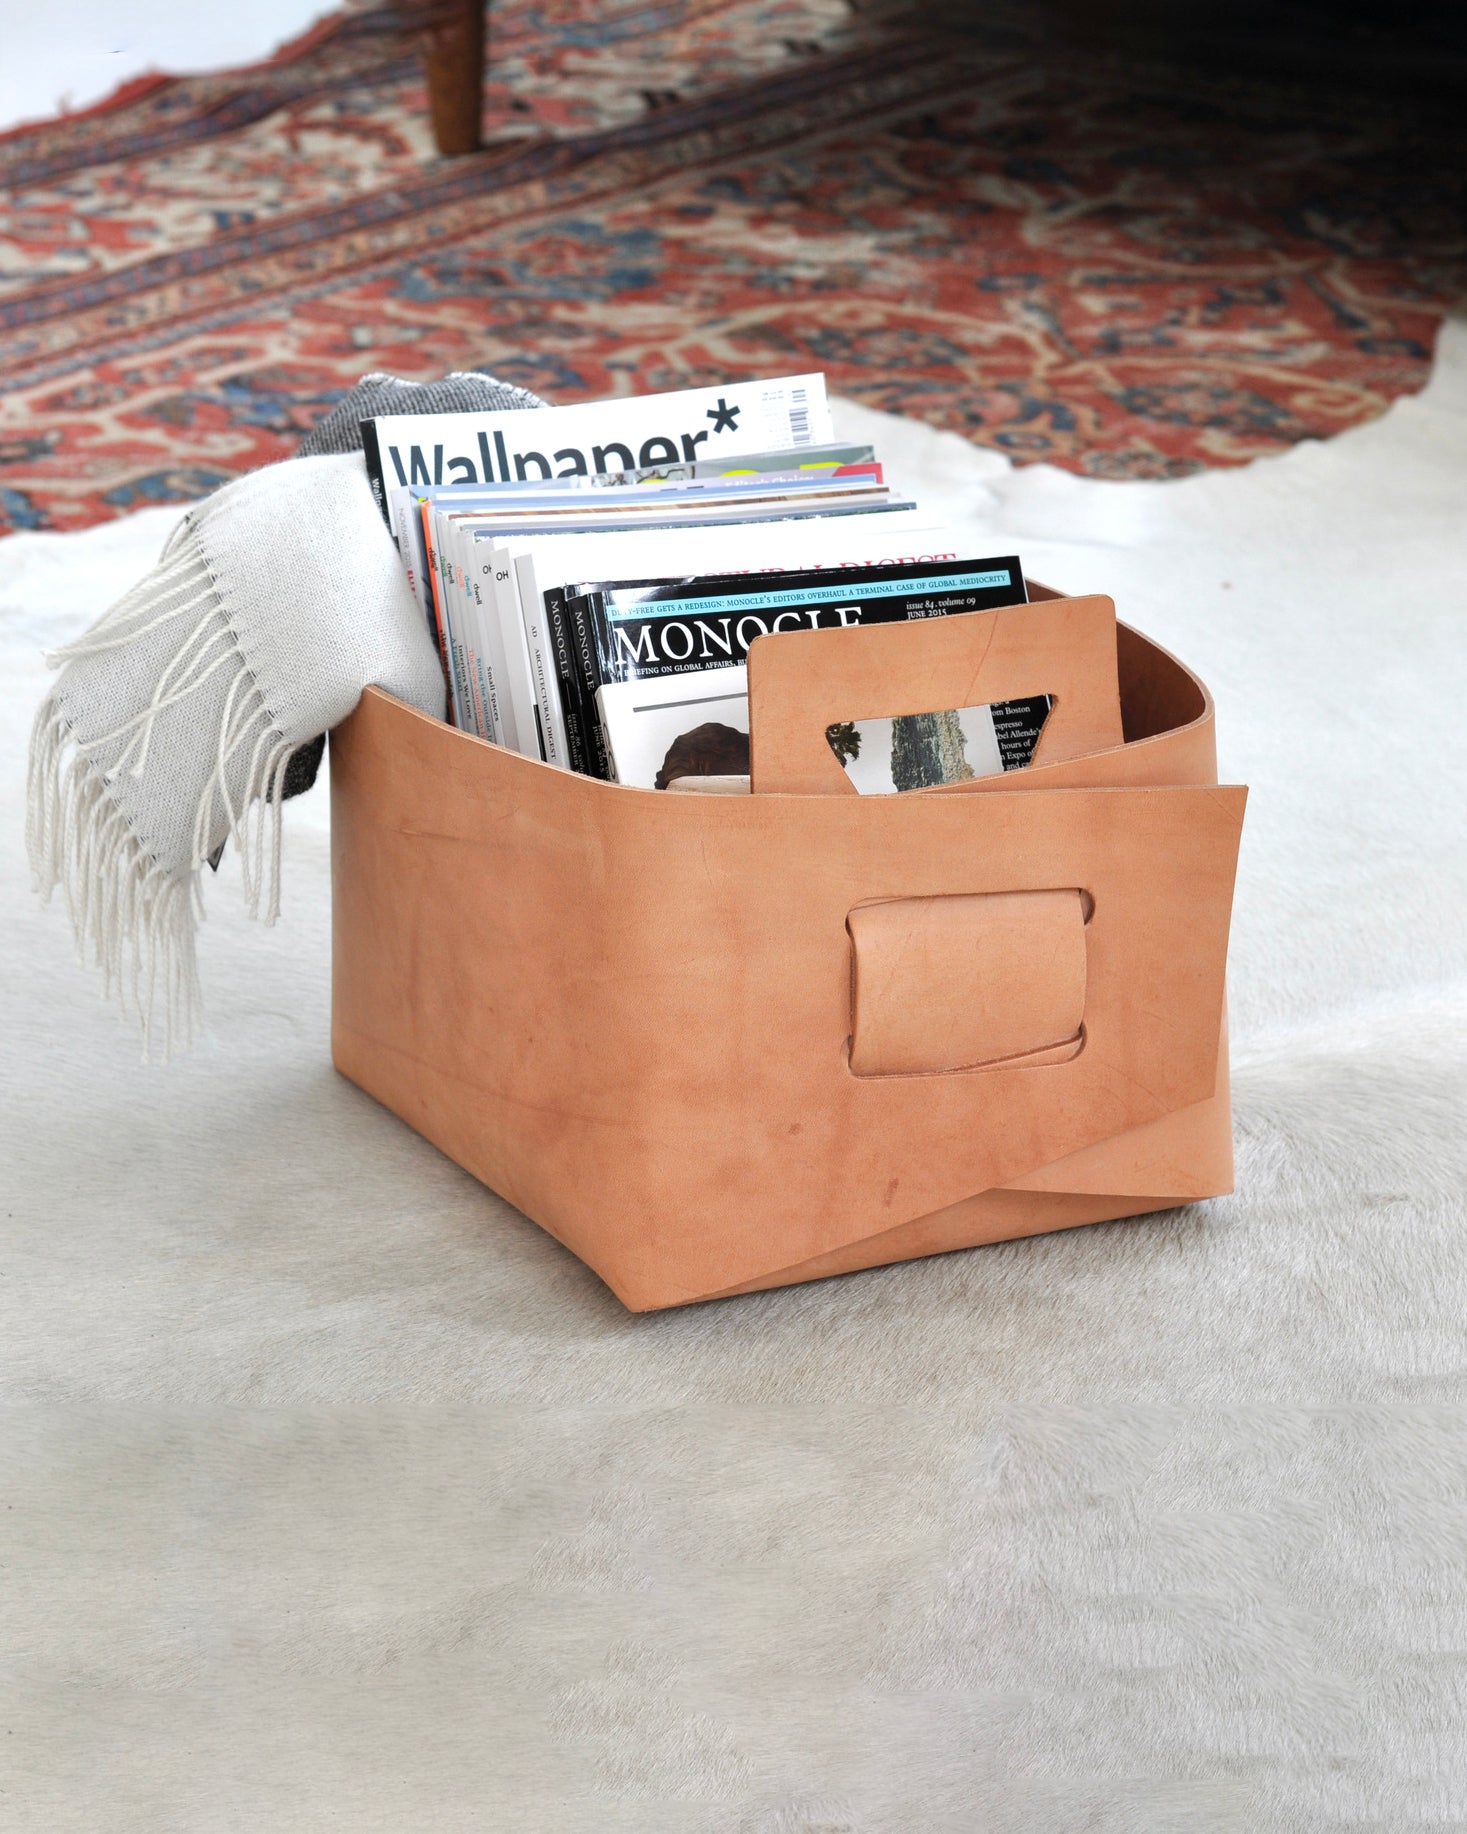 Small Leather Basket in Black